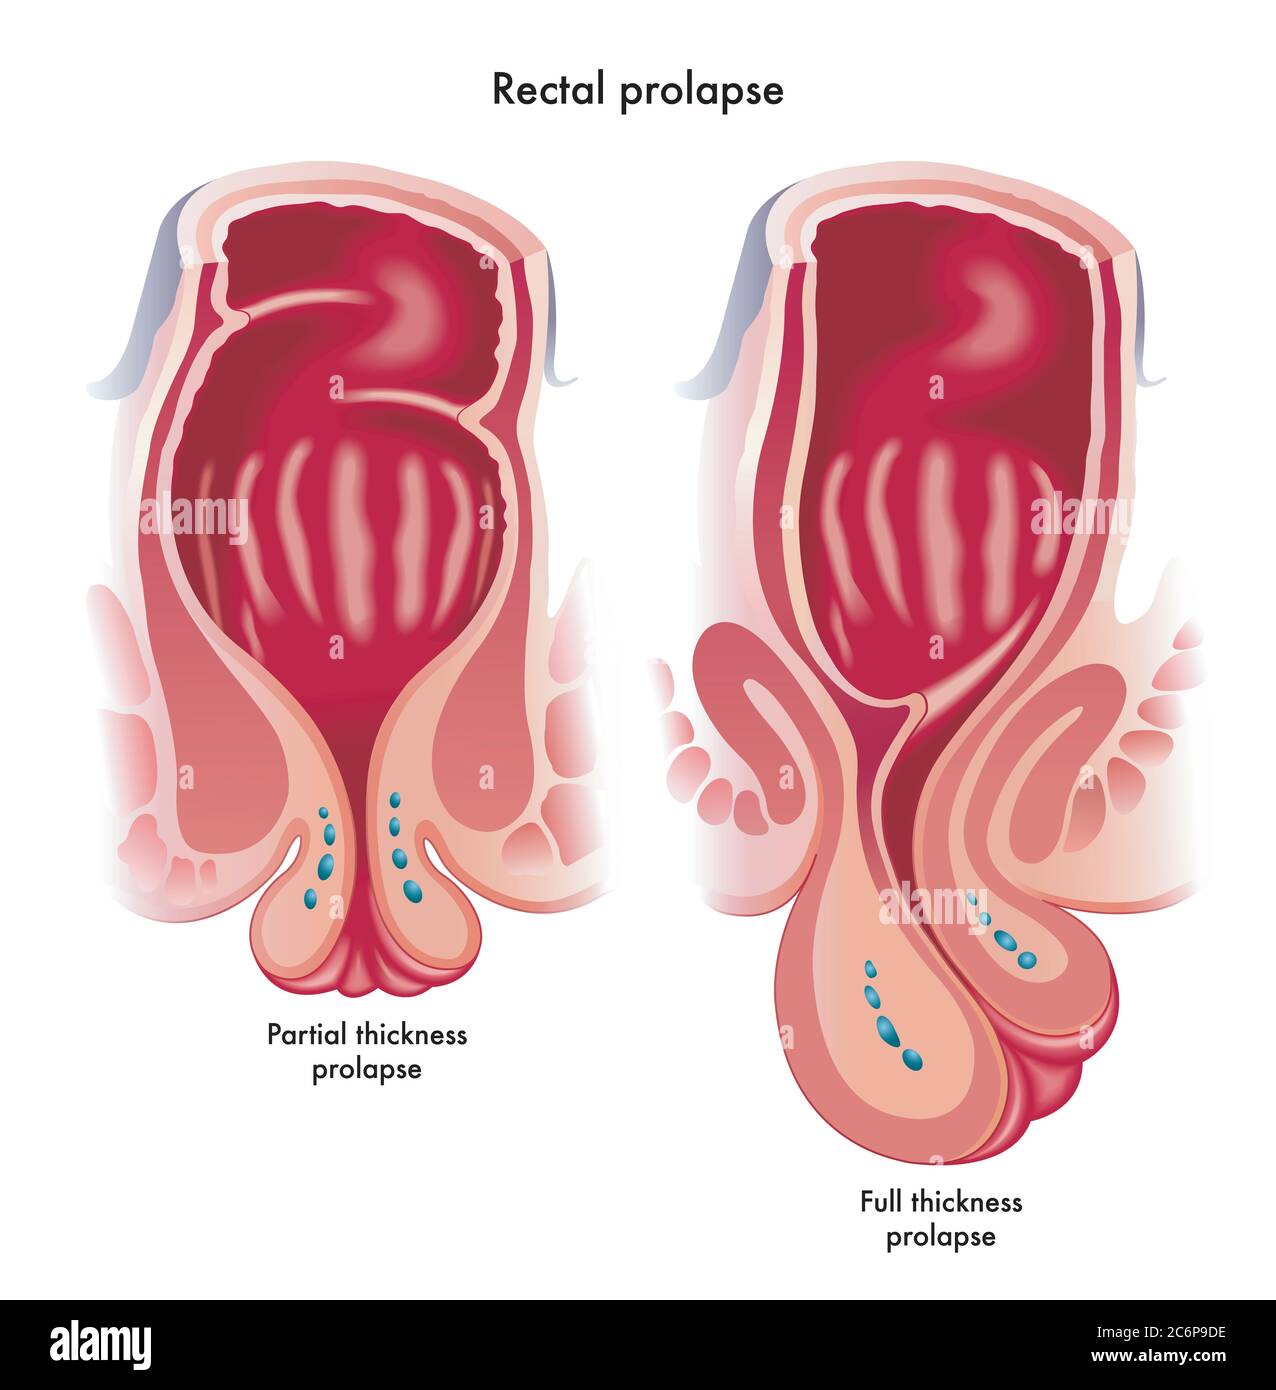 Medical illustration showing two types of rectal prolapse, a partial thickness prolapse, and a full thickness prolapsed. Stock Photo